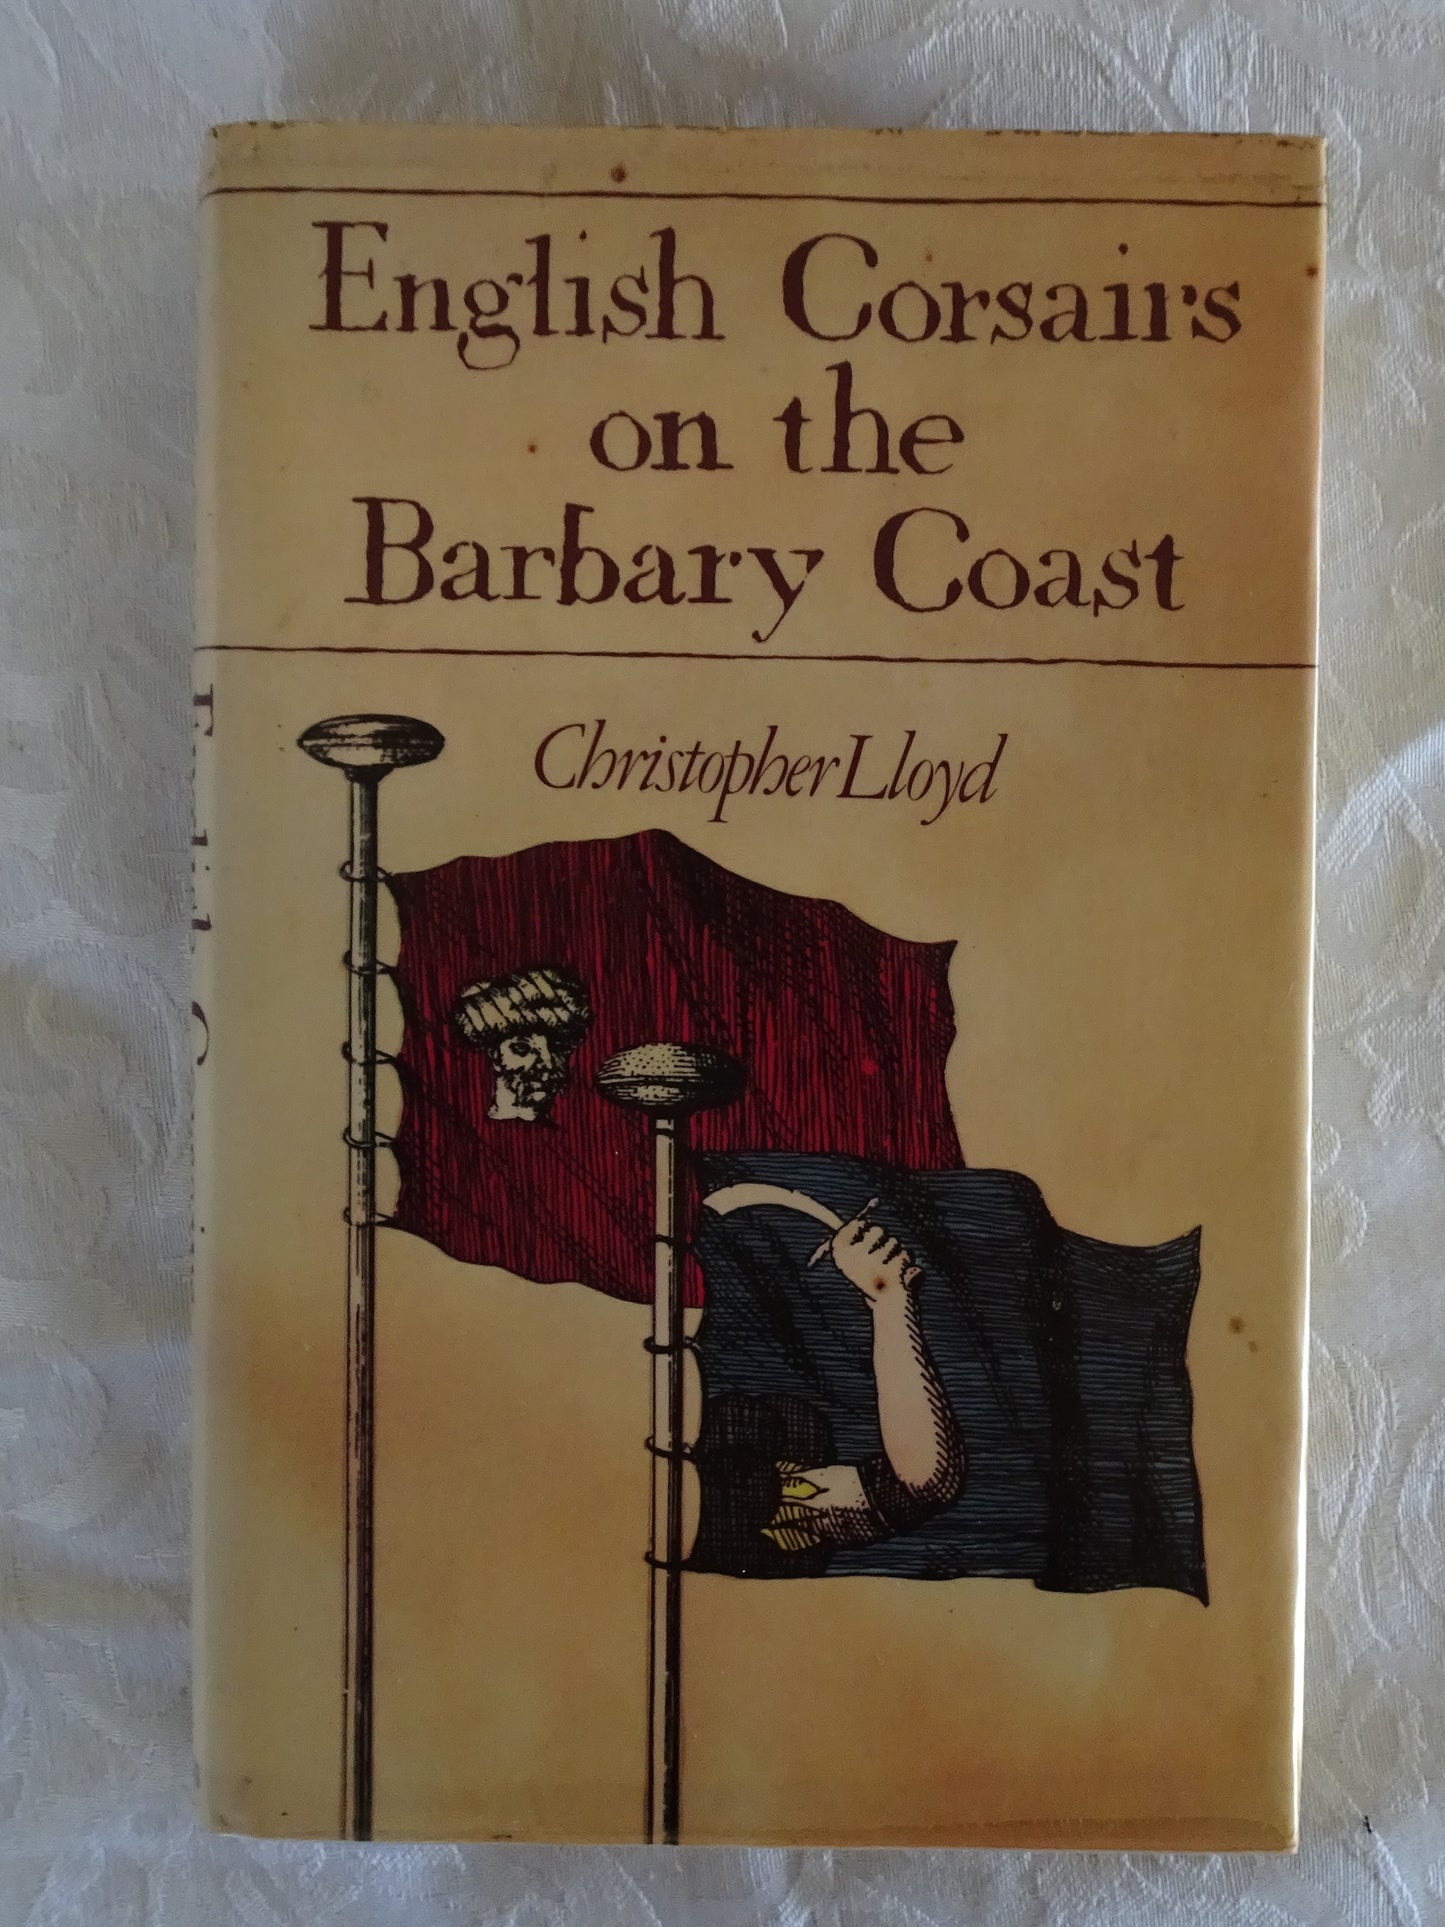 English Corsairs on the Barbary Coast by Christopher Lloyd